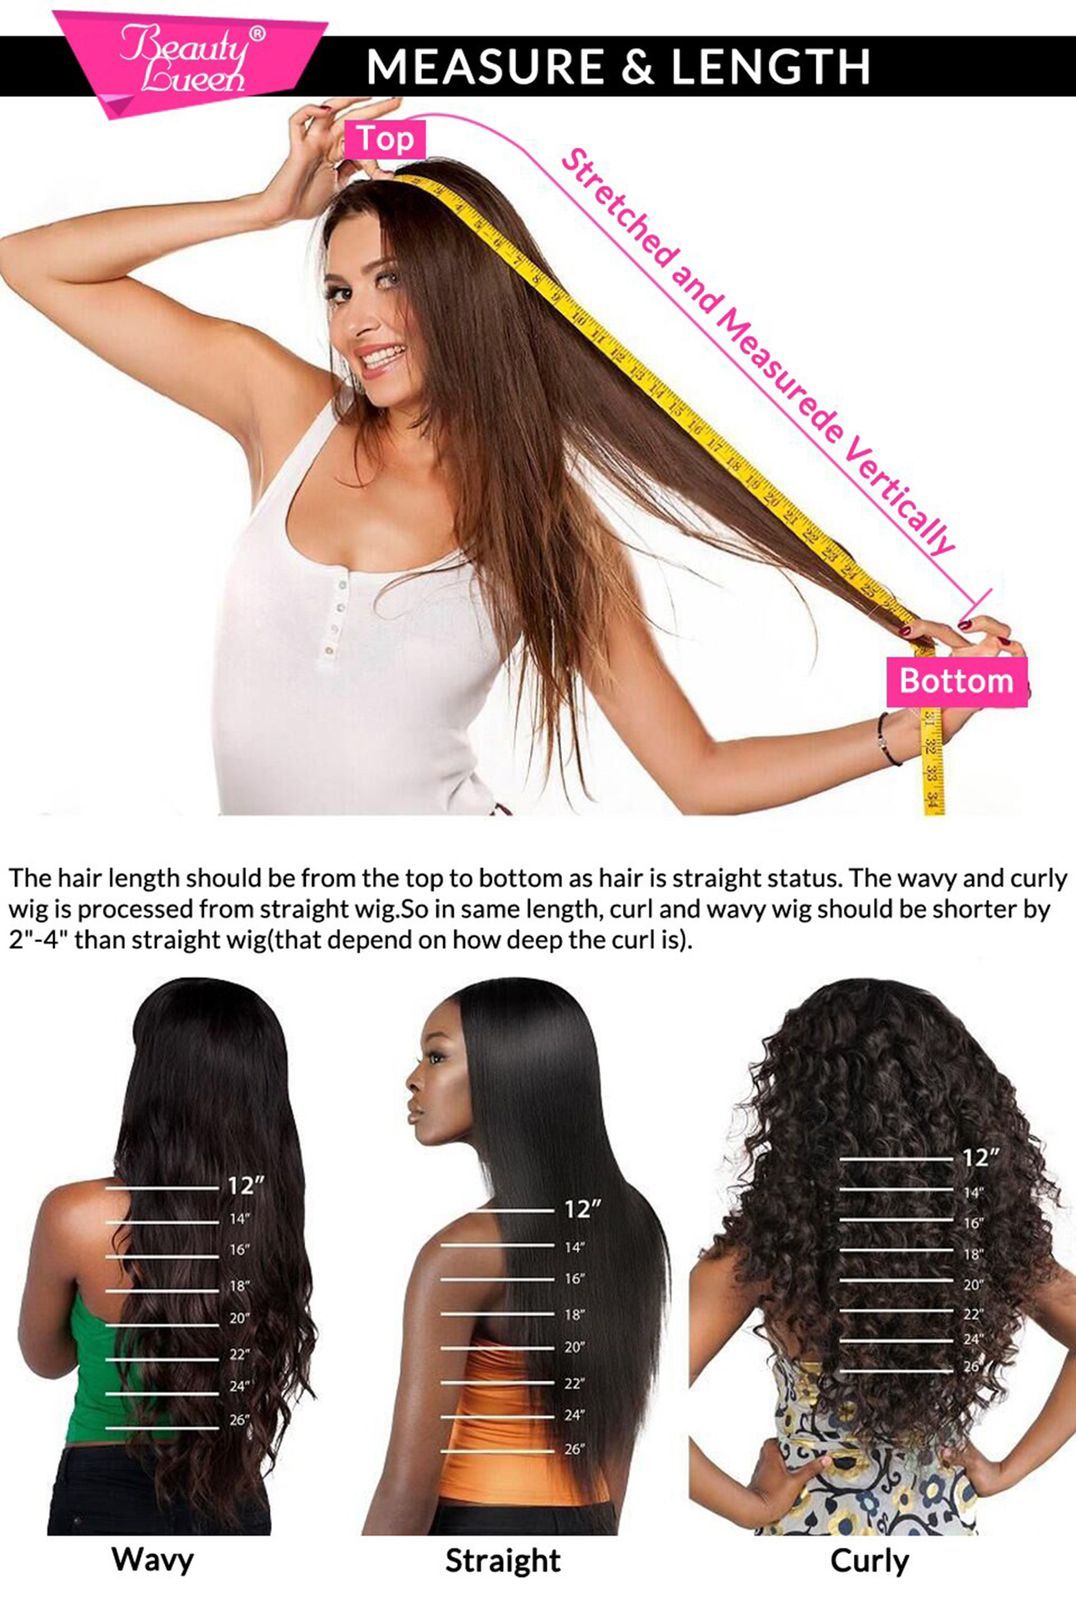 How To Measure Curly Hair Length